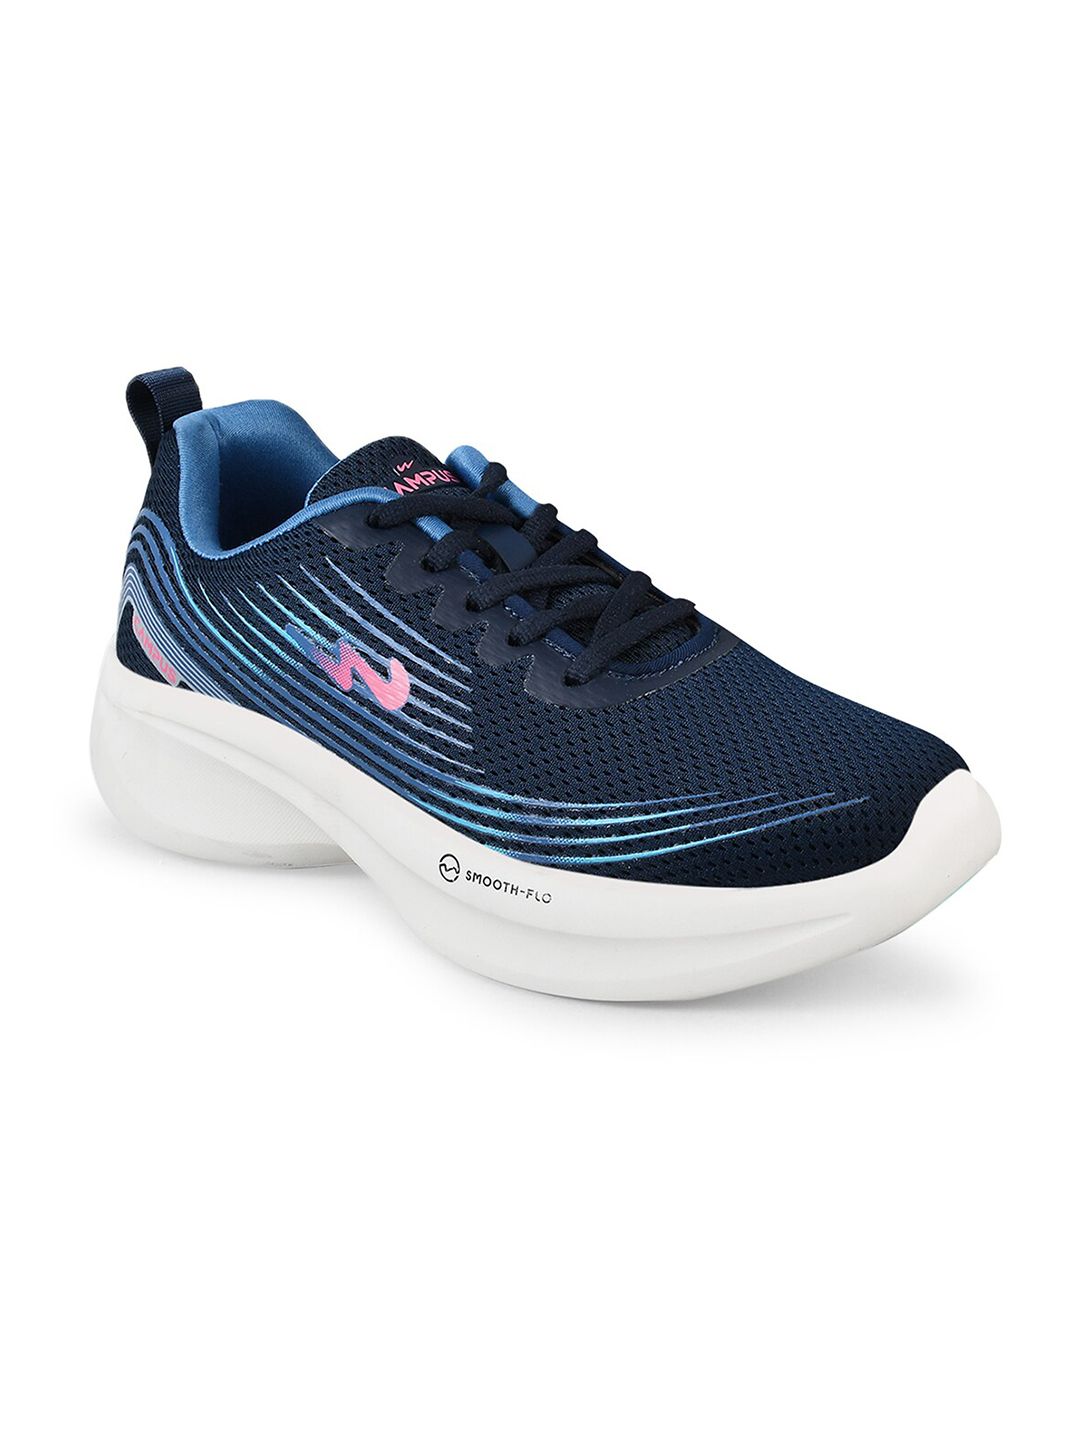 Campus Women Navy Blue & White Printed Mesh Running Shoes Price in India